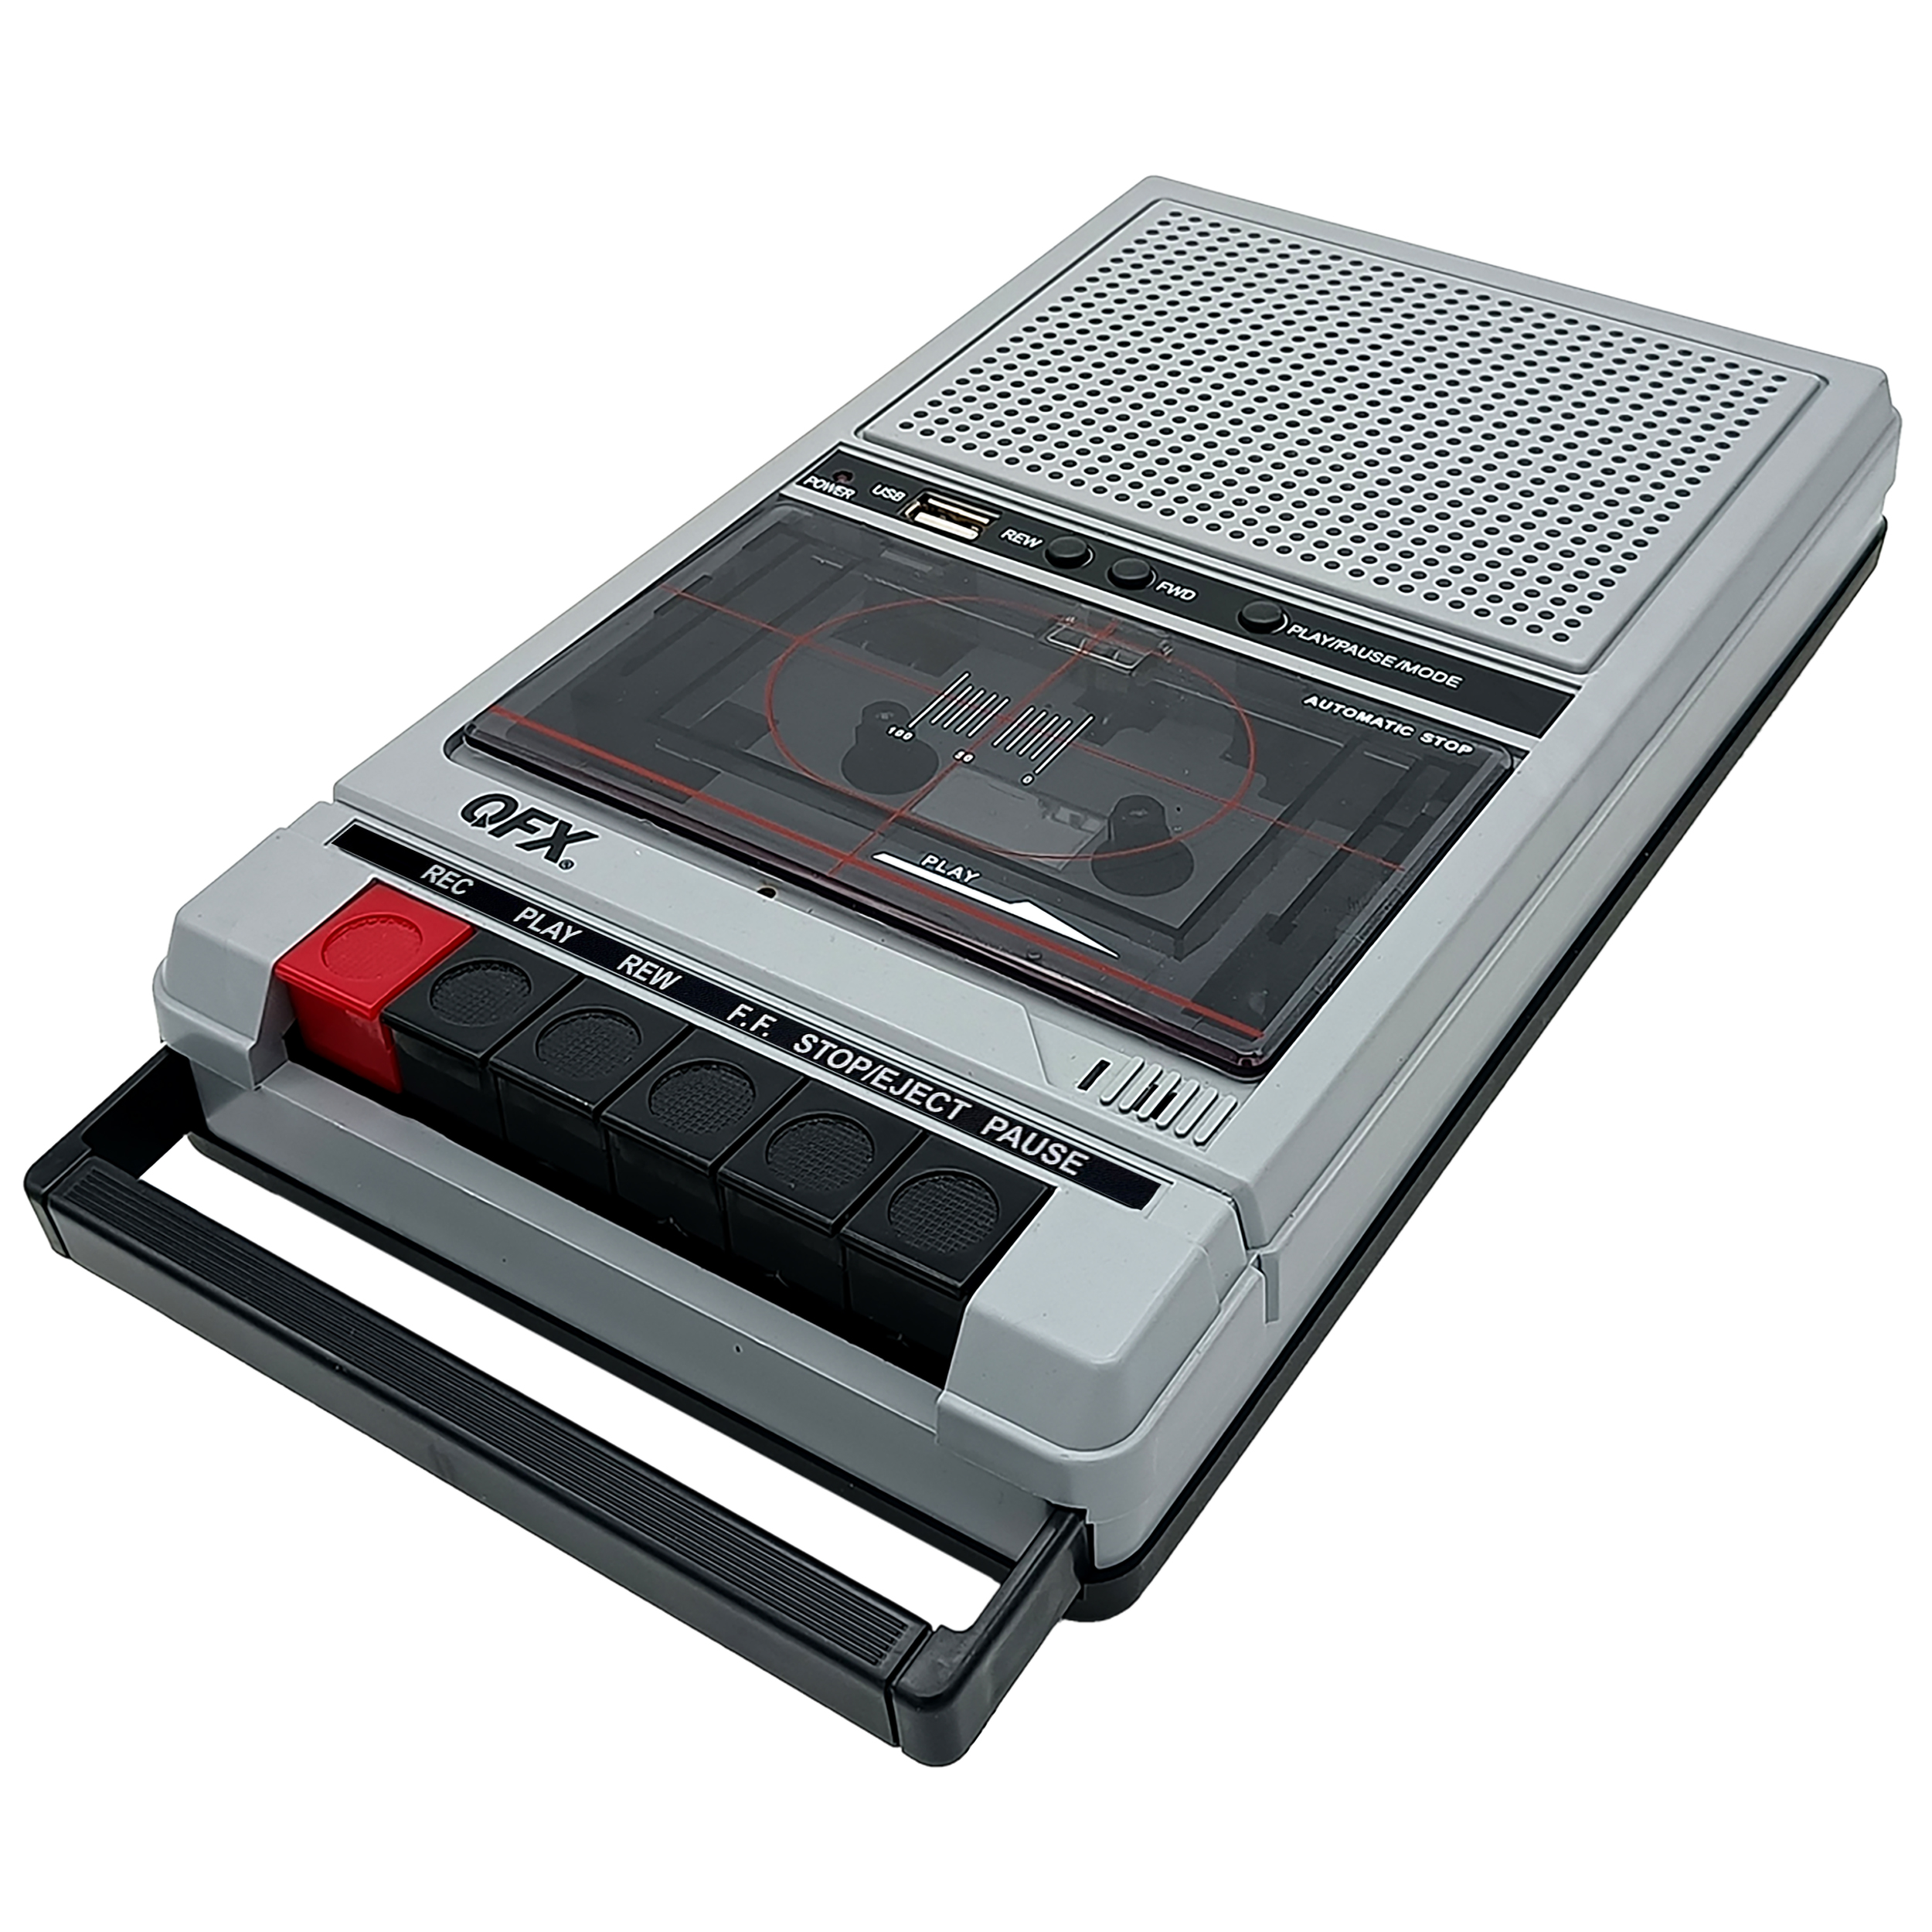 Best Buy: Crosley Cassette Player with AM/FM Radio Silver CT100B-SI